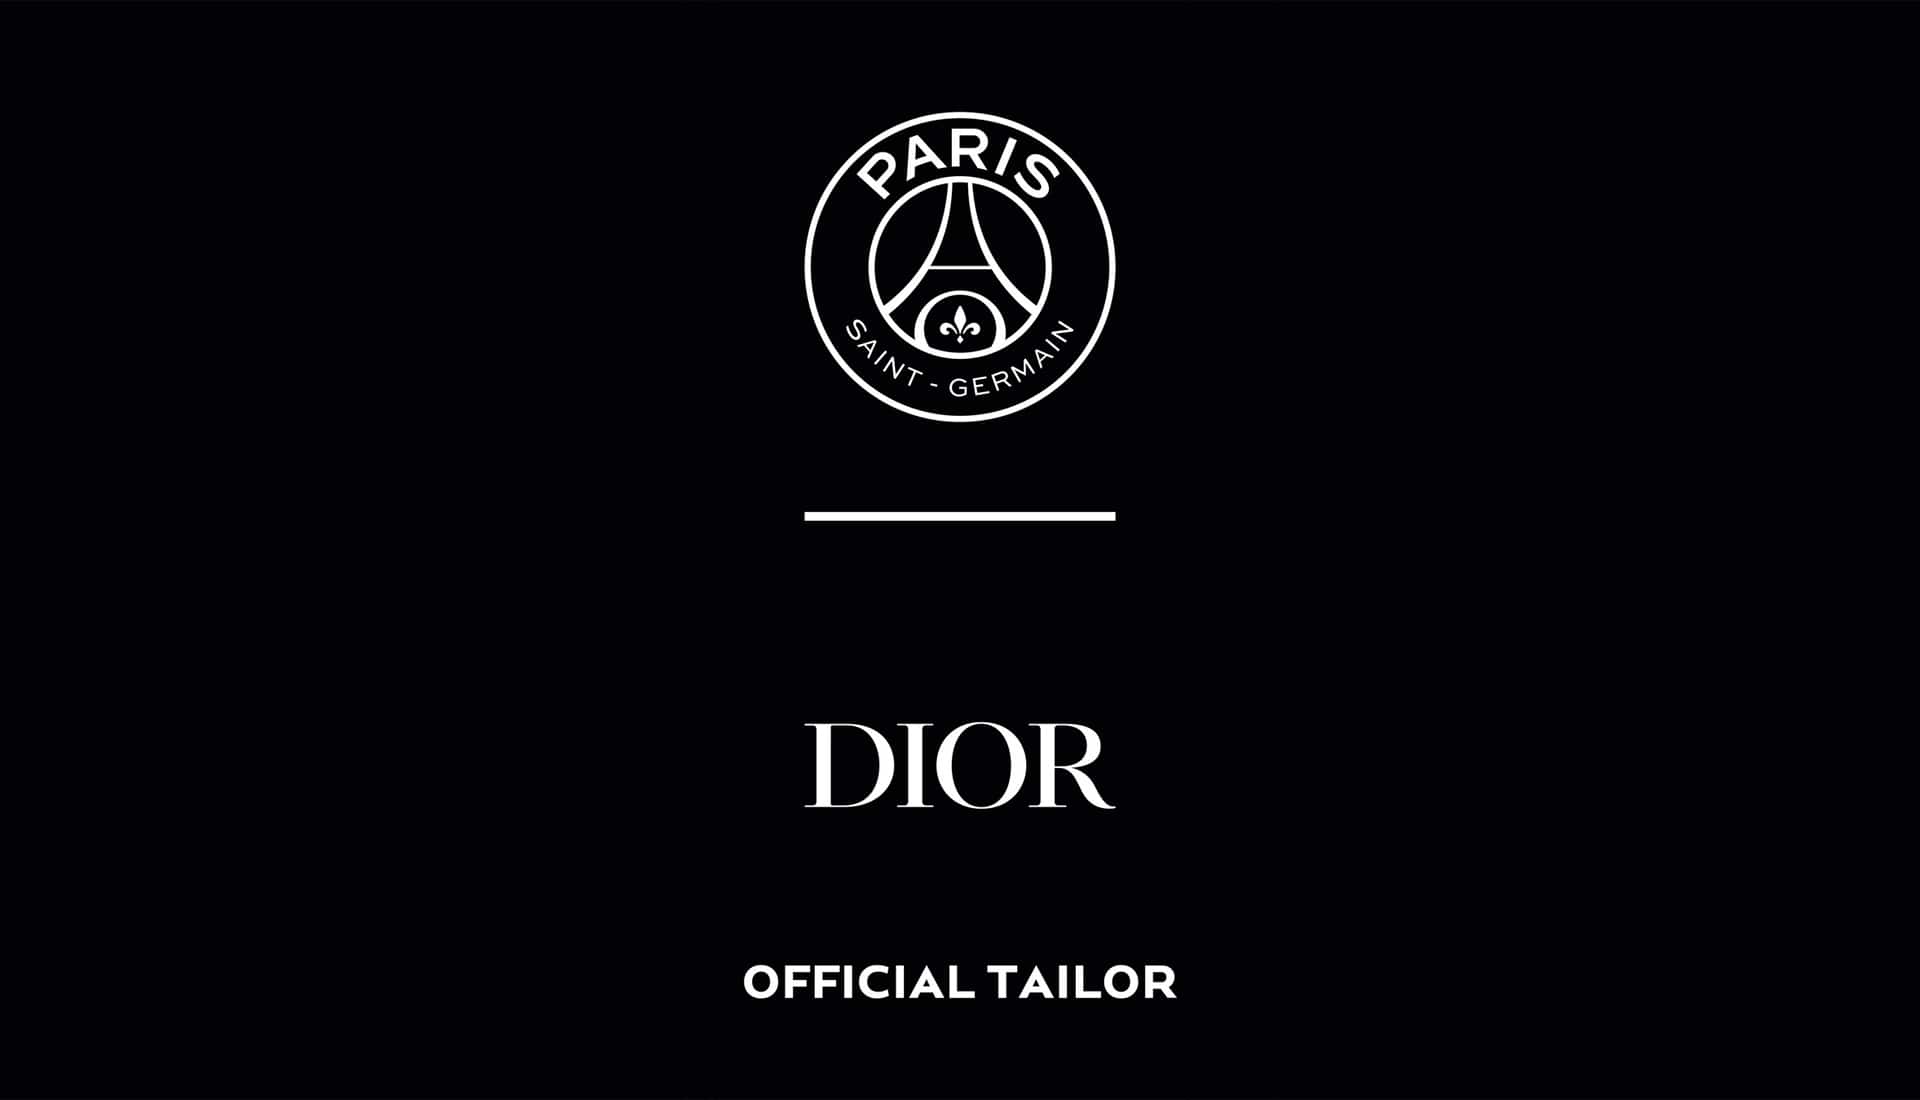 After Messi joined him he hired SaintGermain Christian Dior to design the  clubs uniforms